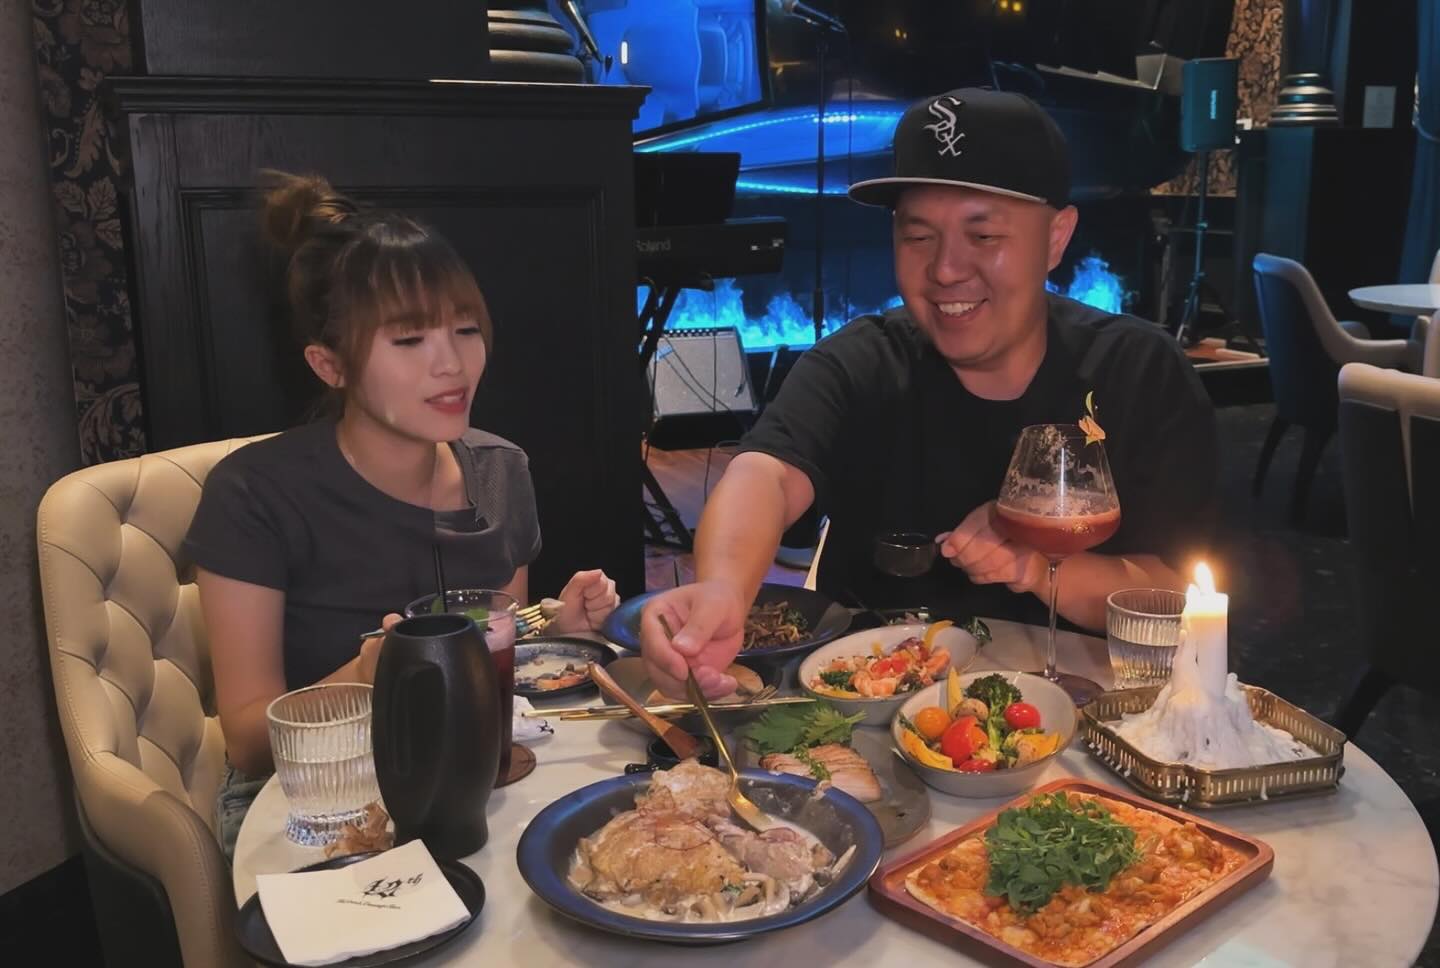 Cathy and I enjoyed this candle dinner much. Wait for this restaurant review video, something very special in this city. #RestaurantReview #美食探店